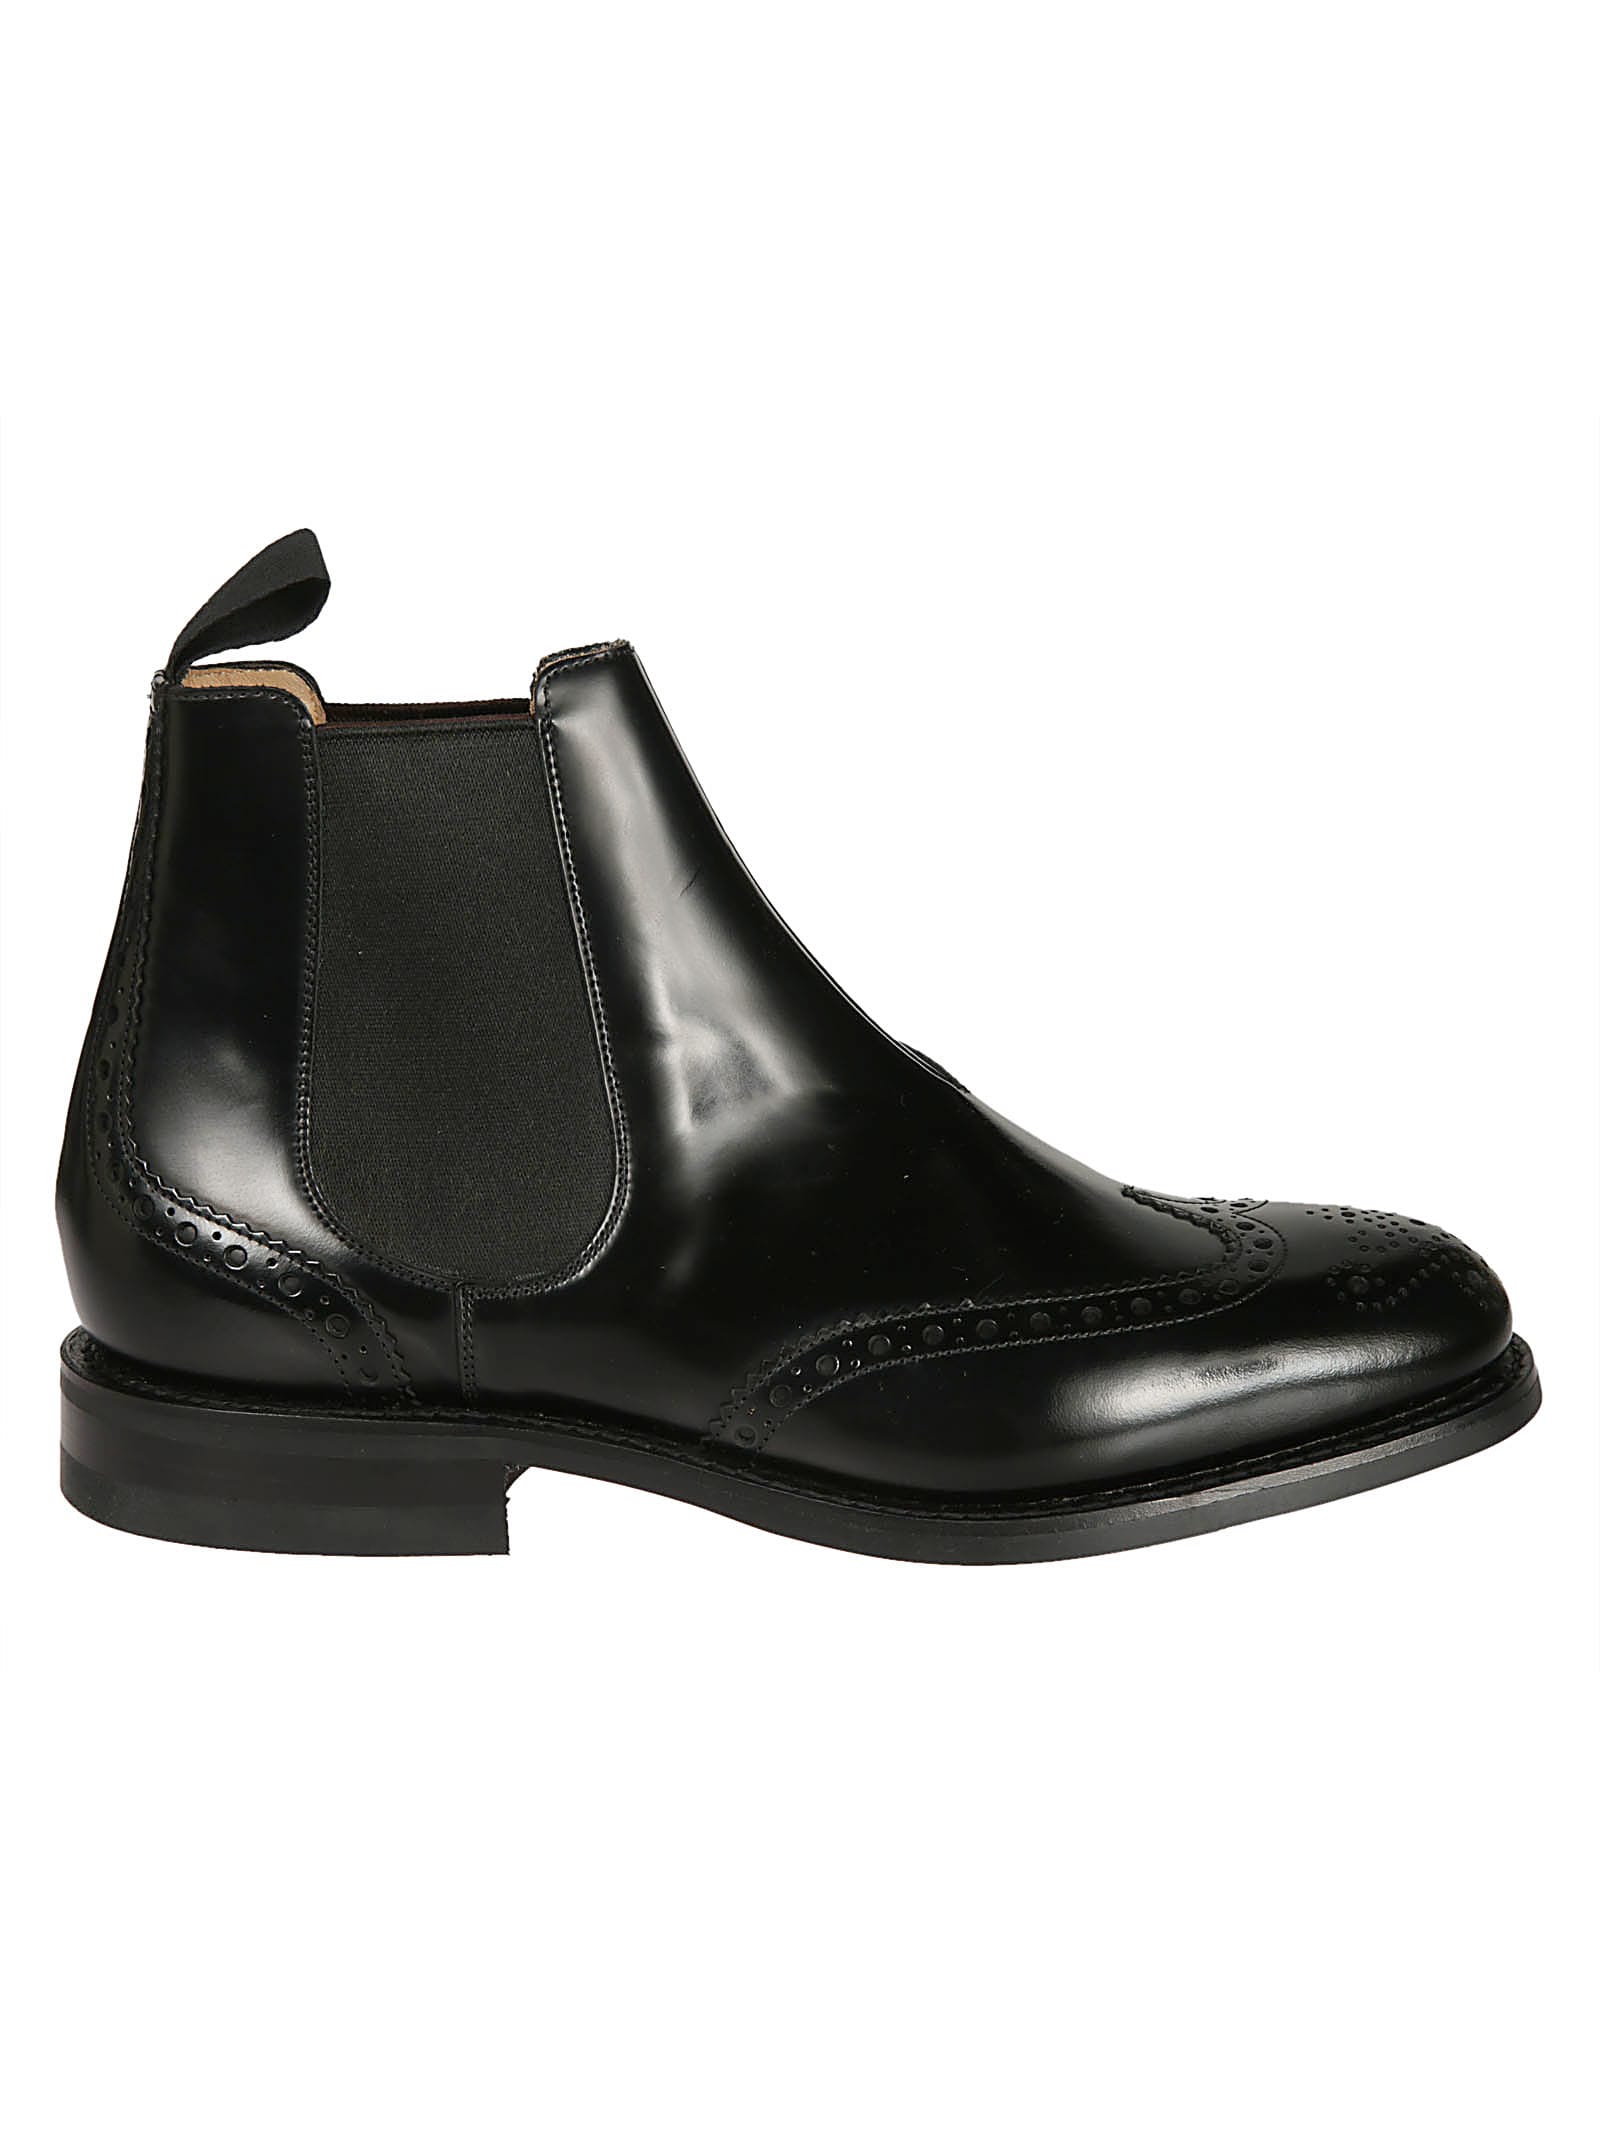 Churchs Chelsea Ankle Boots